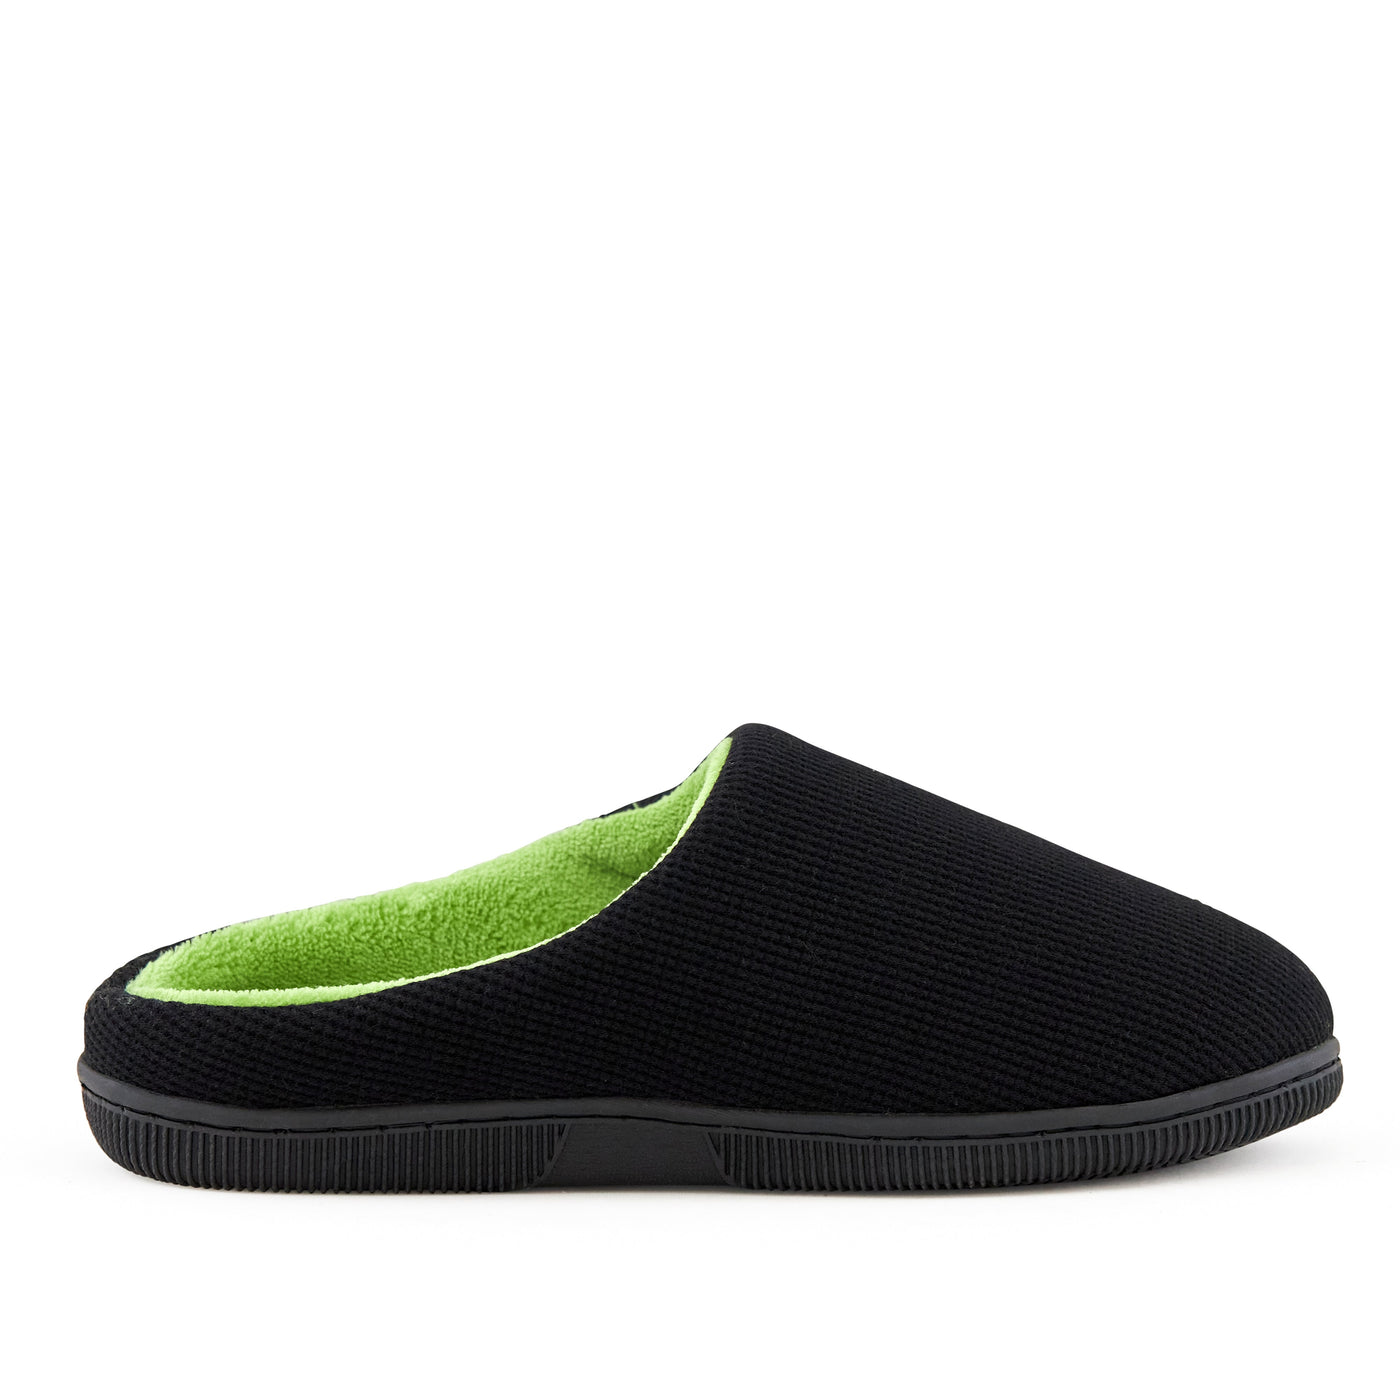 Men's Slippers Chill Black by Nest Shoes